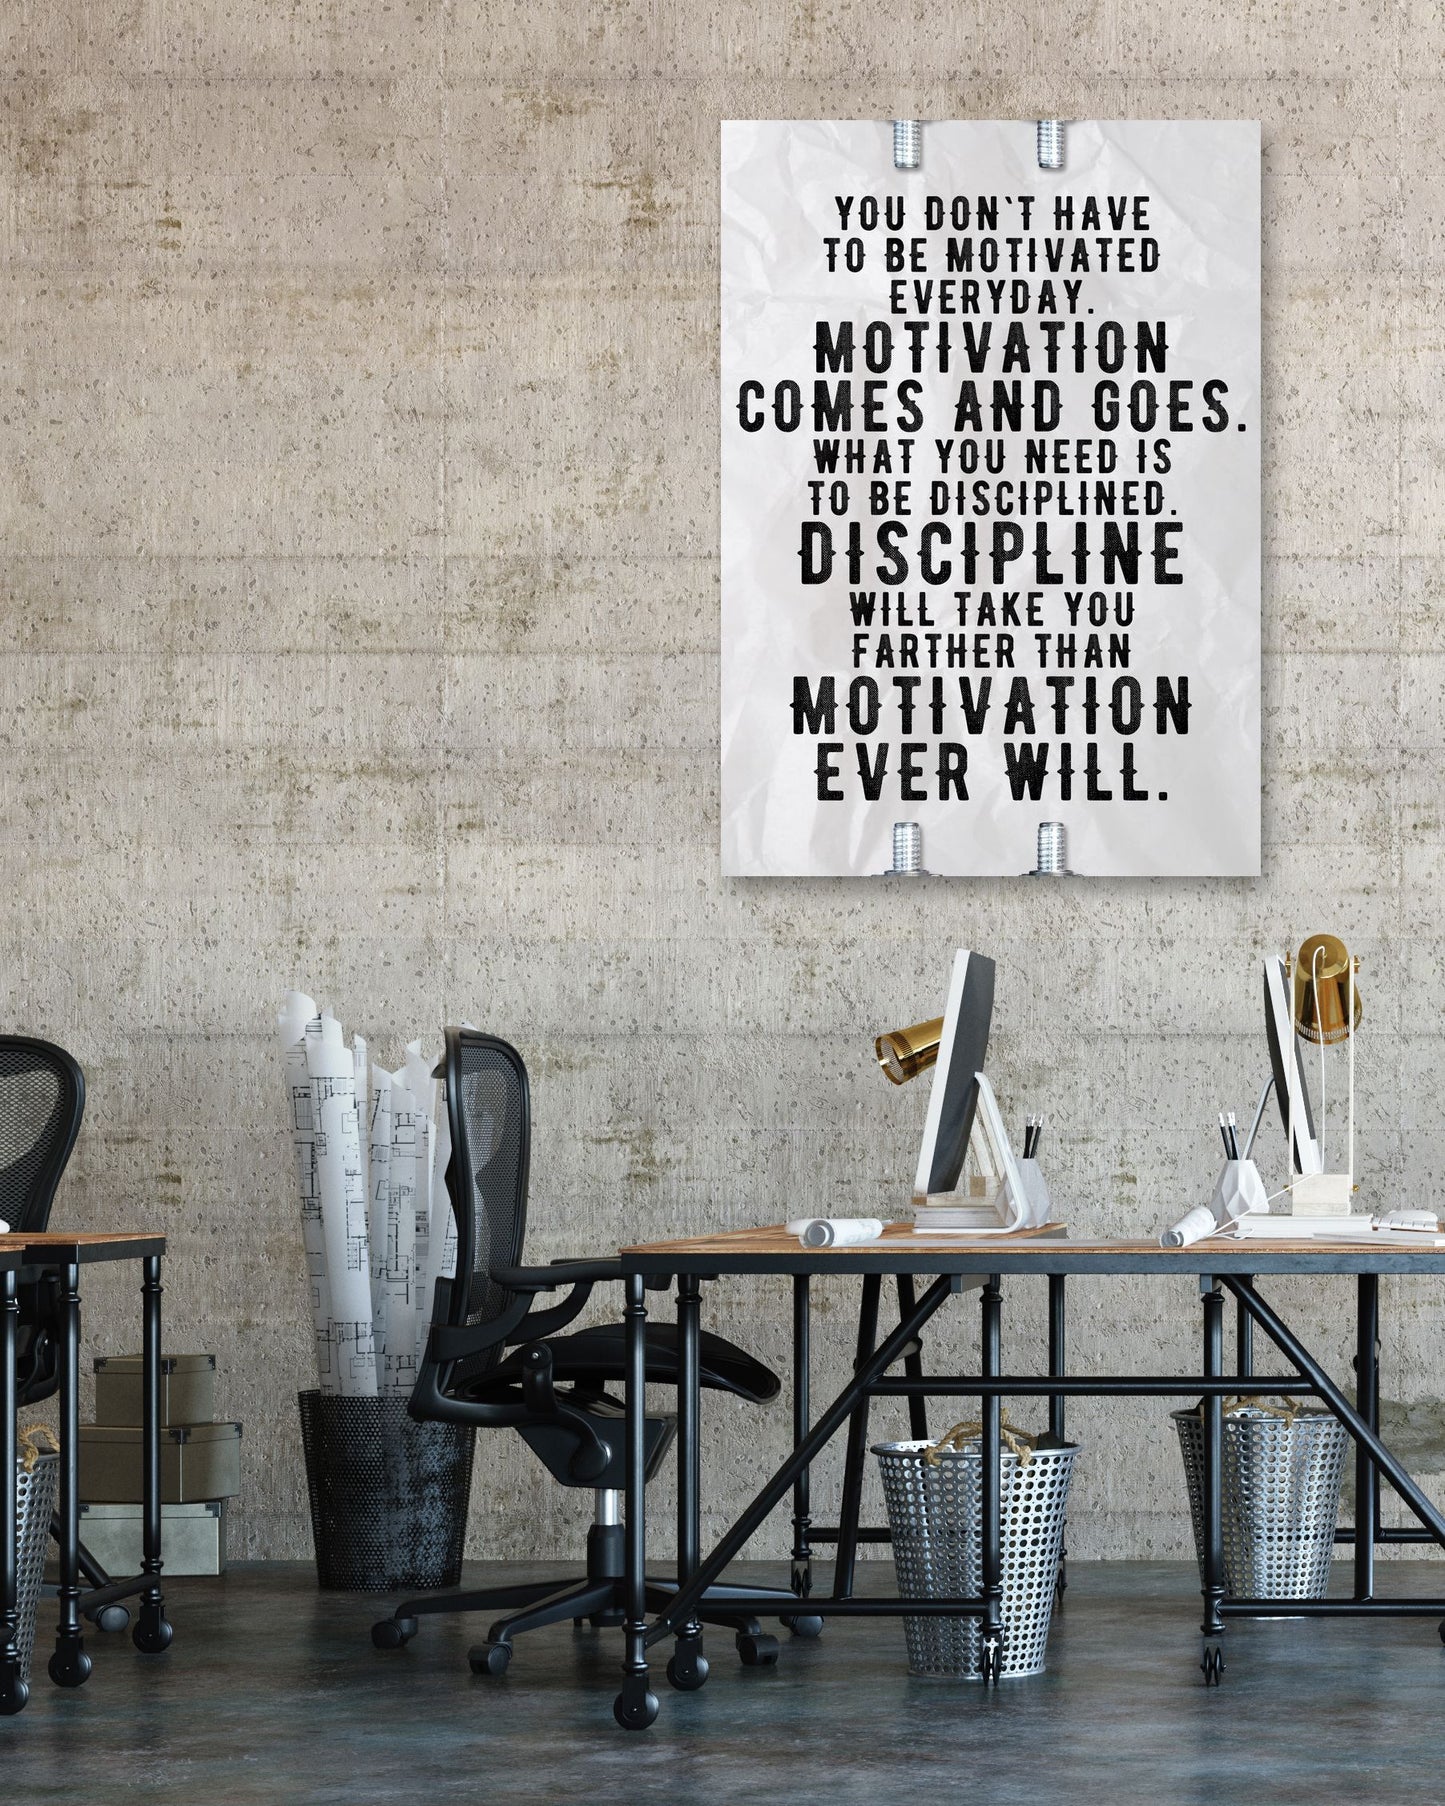 Motivation Comes And Goes - @ColorizeStudio